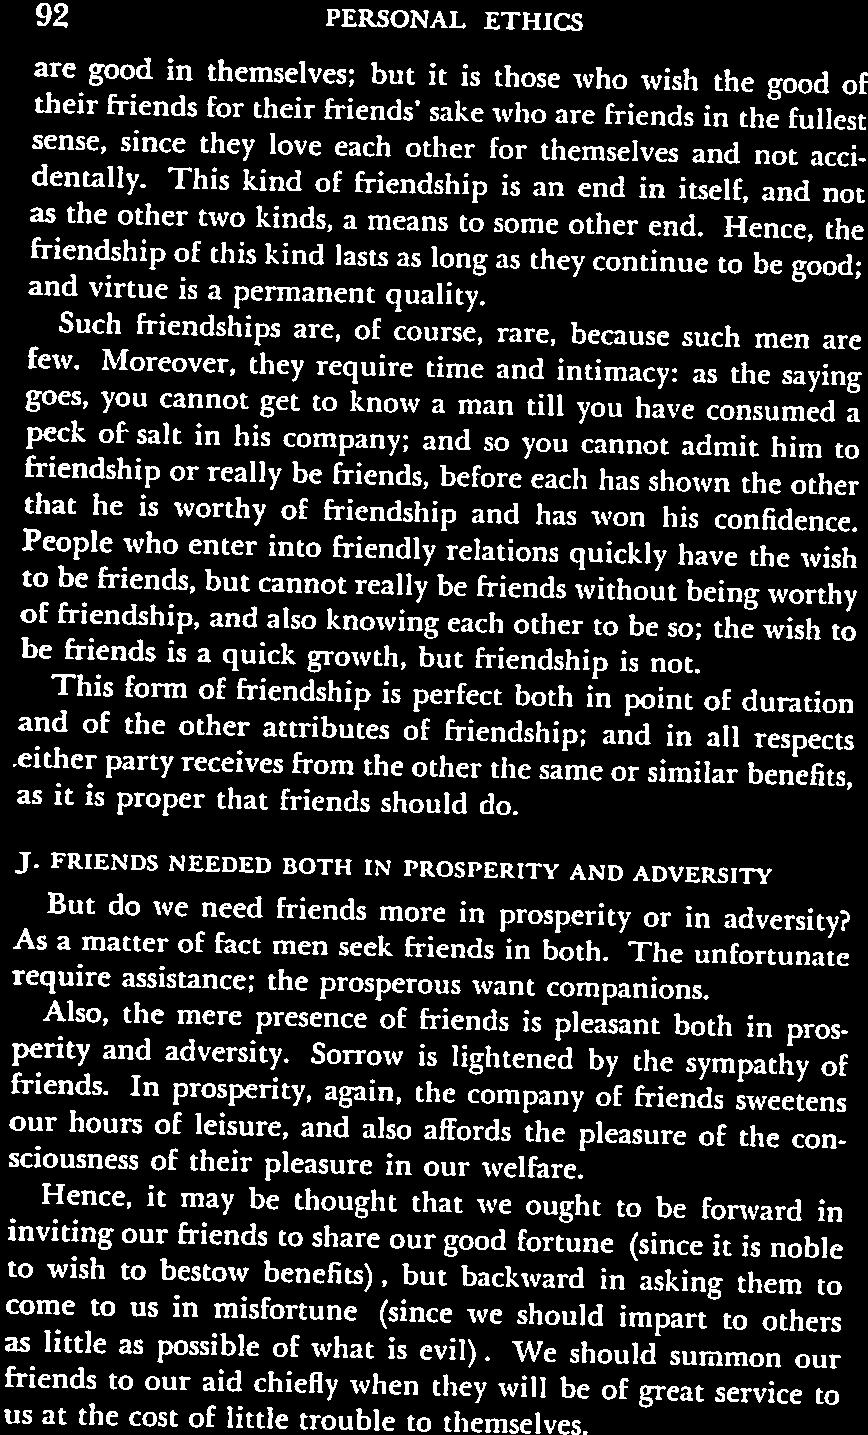 Hence, the friendship of this kind lasts as long as they continue to be good; and virtue is a permanent quality. Such friendships are, of course, rare, because such men are few.